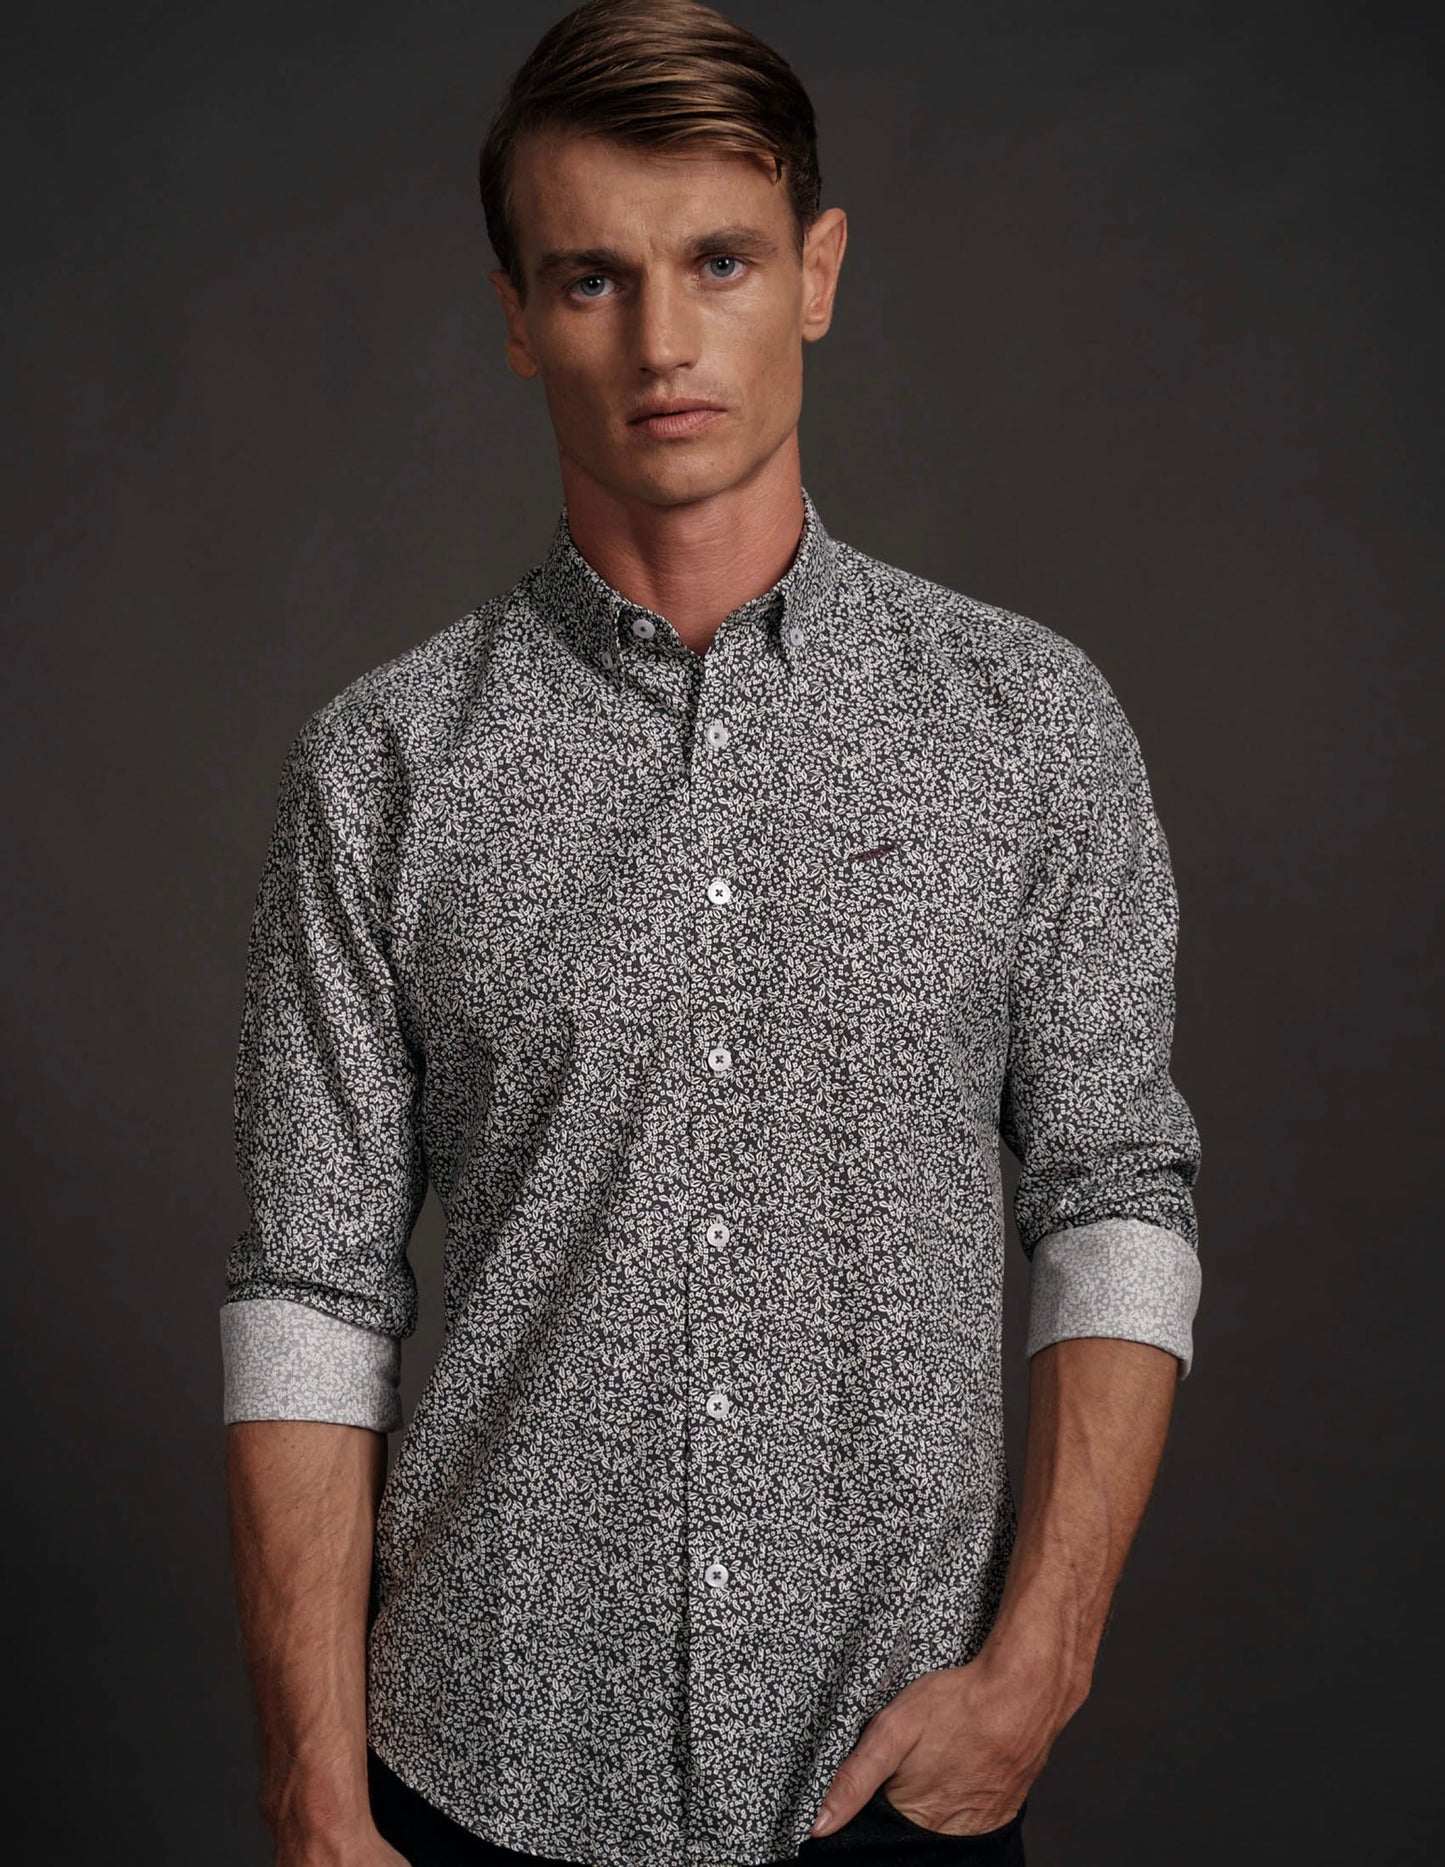 Slim Fit Long sleeves - Casual - Charcoal